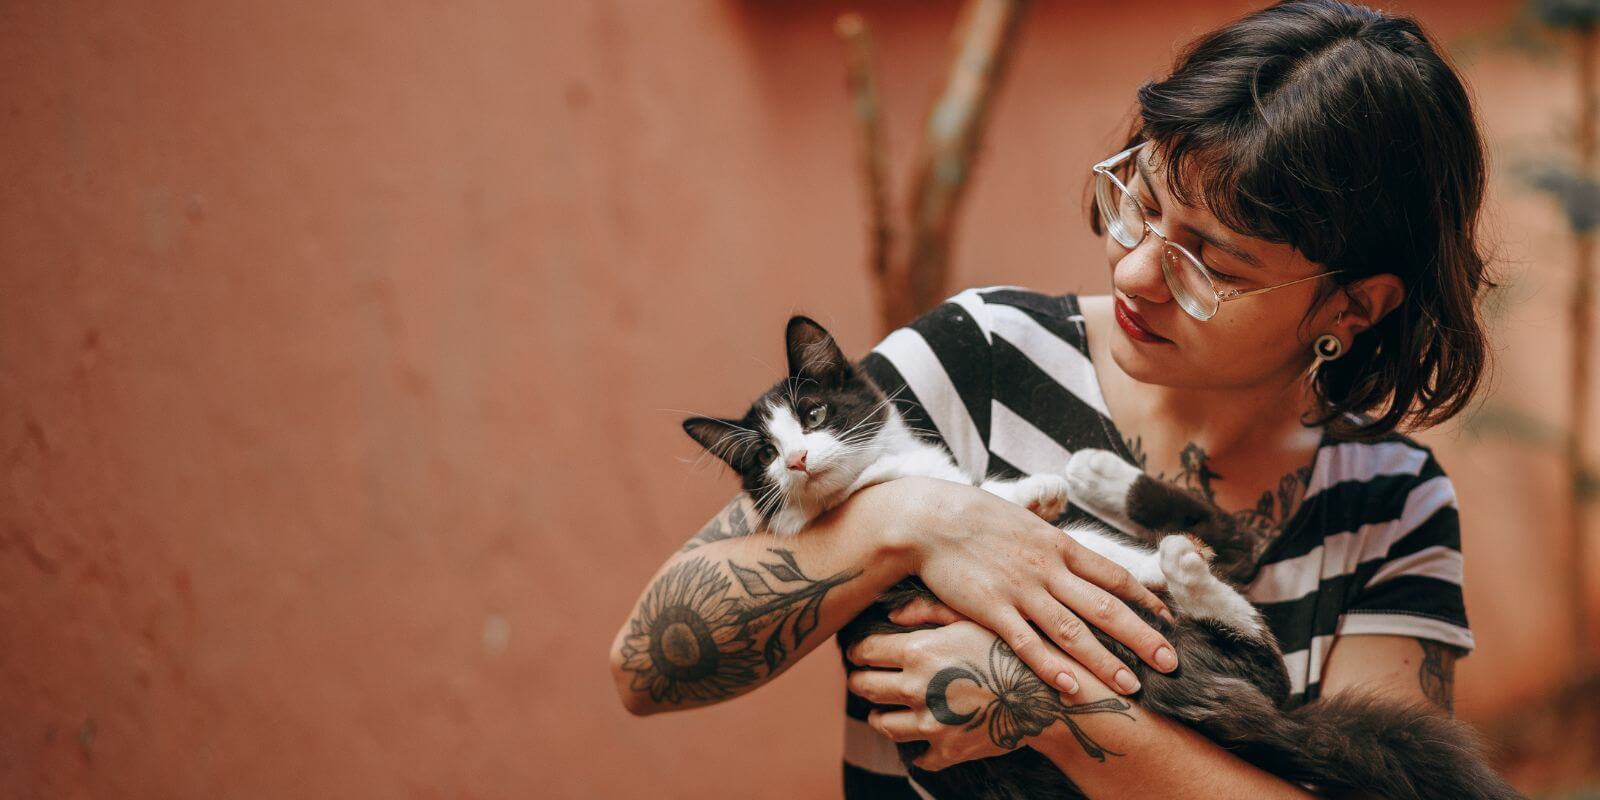 Brown-haired woman with tattoos holding a black and white cat